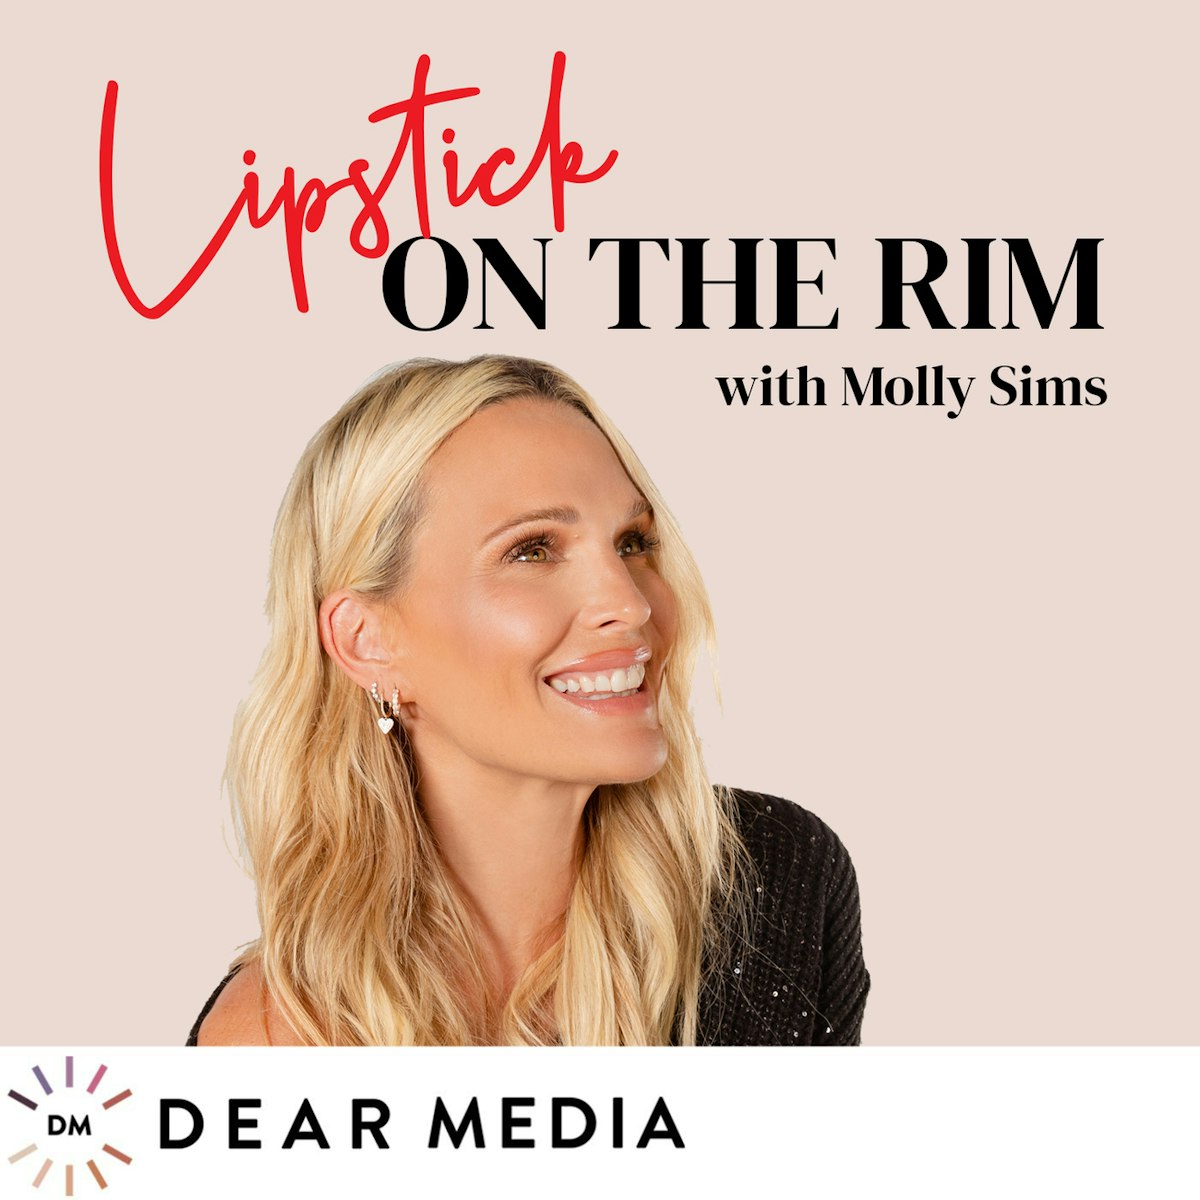 Calling All Beauty Lovers, It's Officially Black Friday - Molly Sims